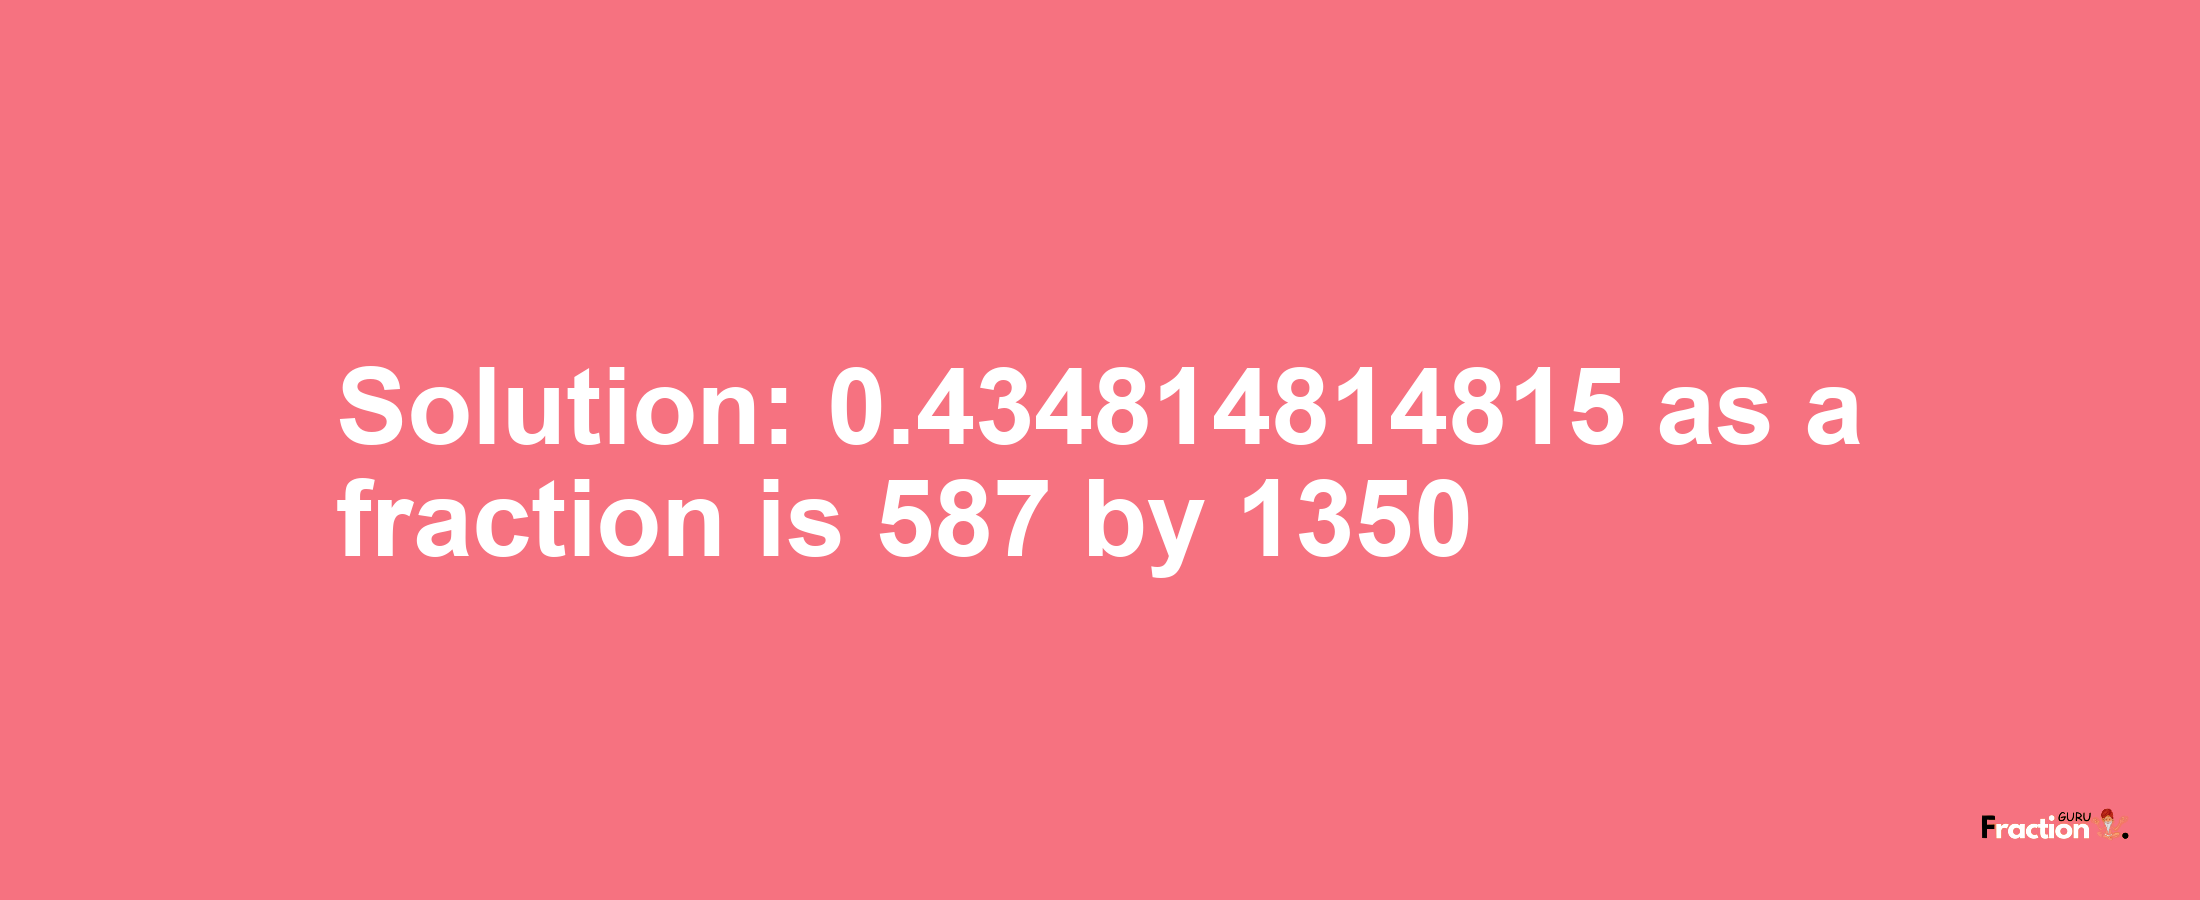 Solution:0.434814814815 as a fraction is 587/1350